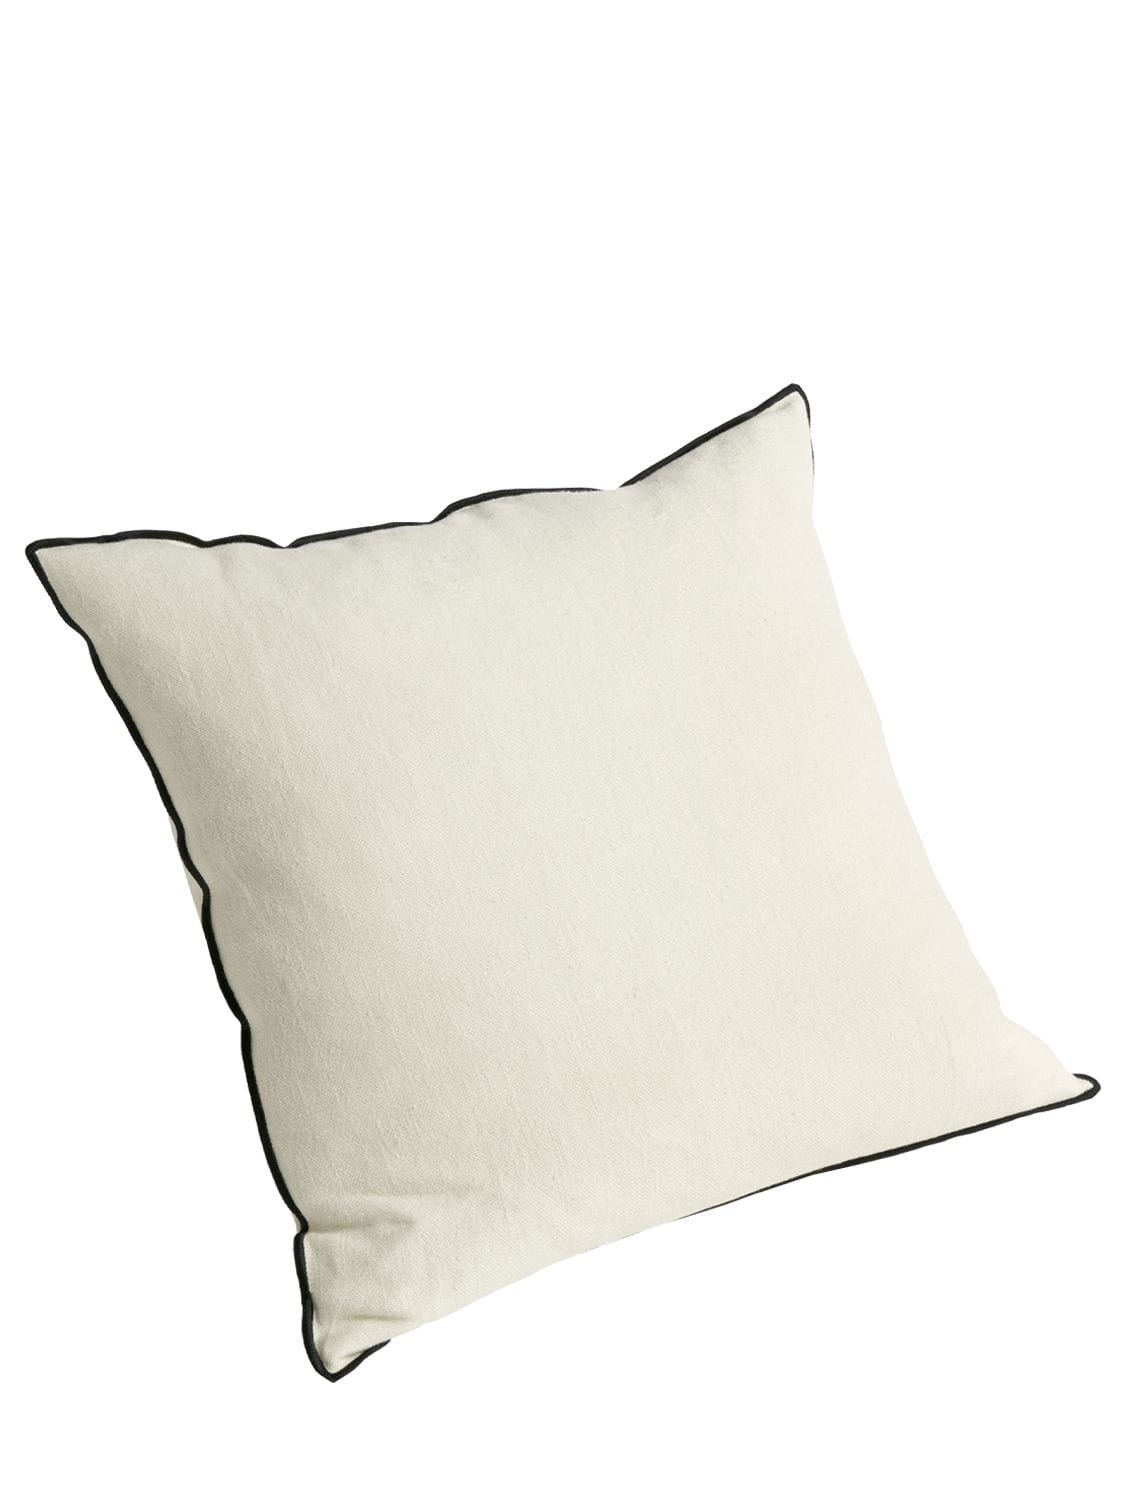 Hay Outline Cushion In Off-white